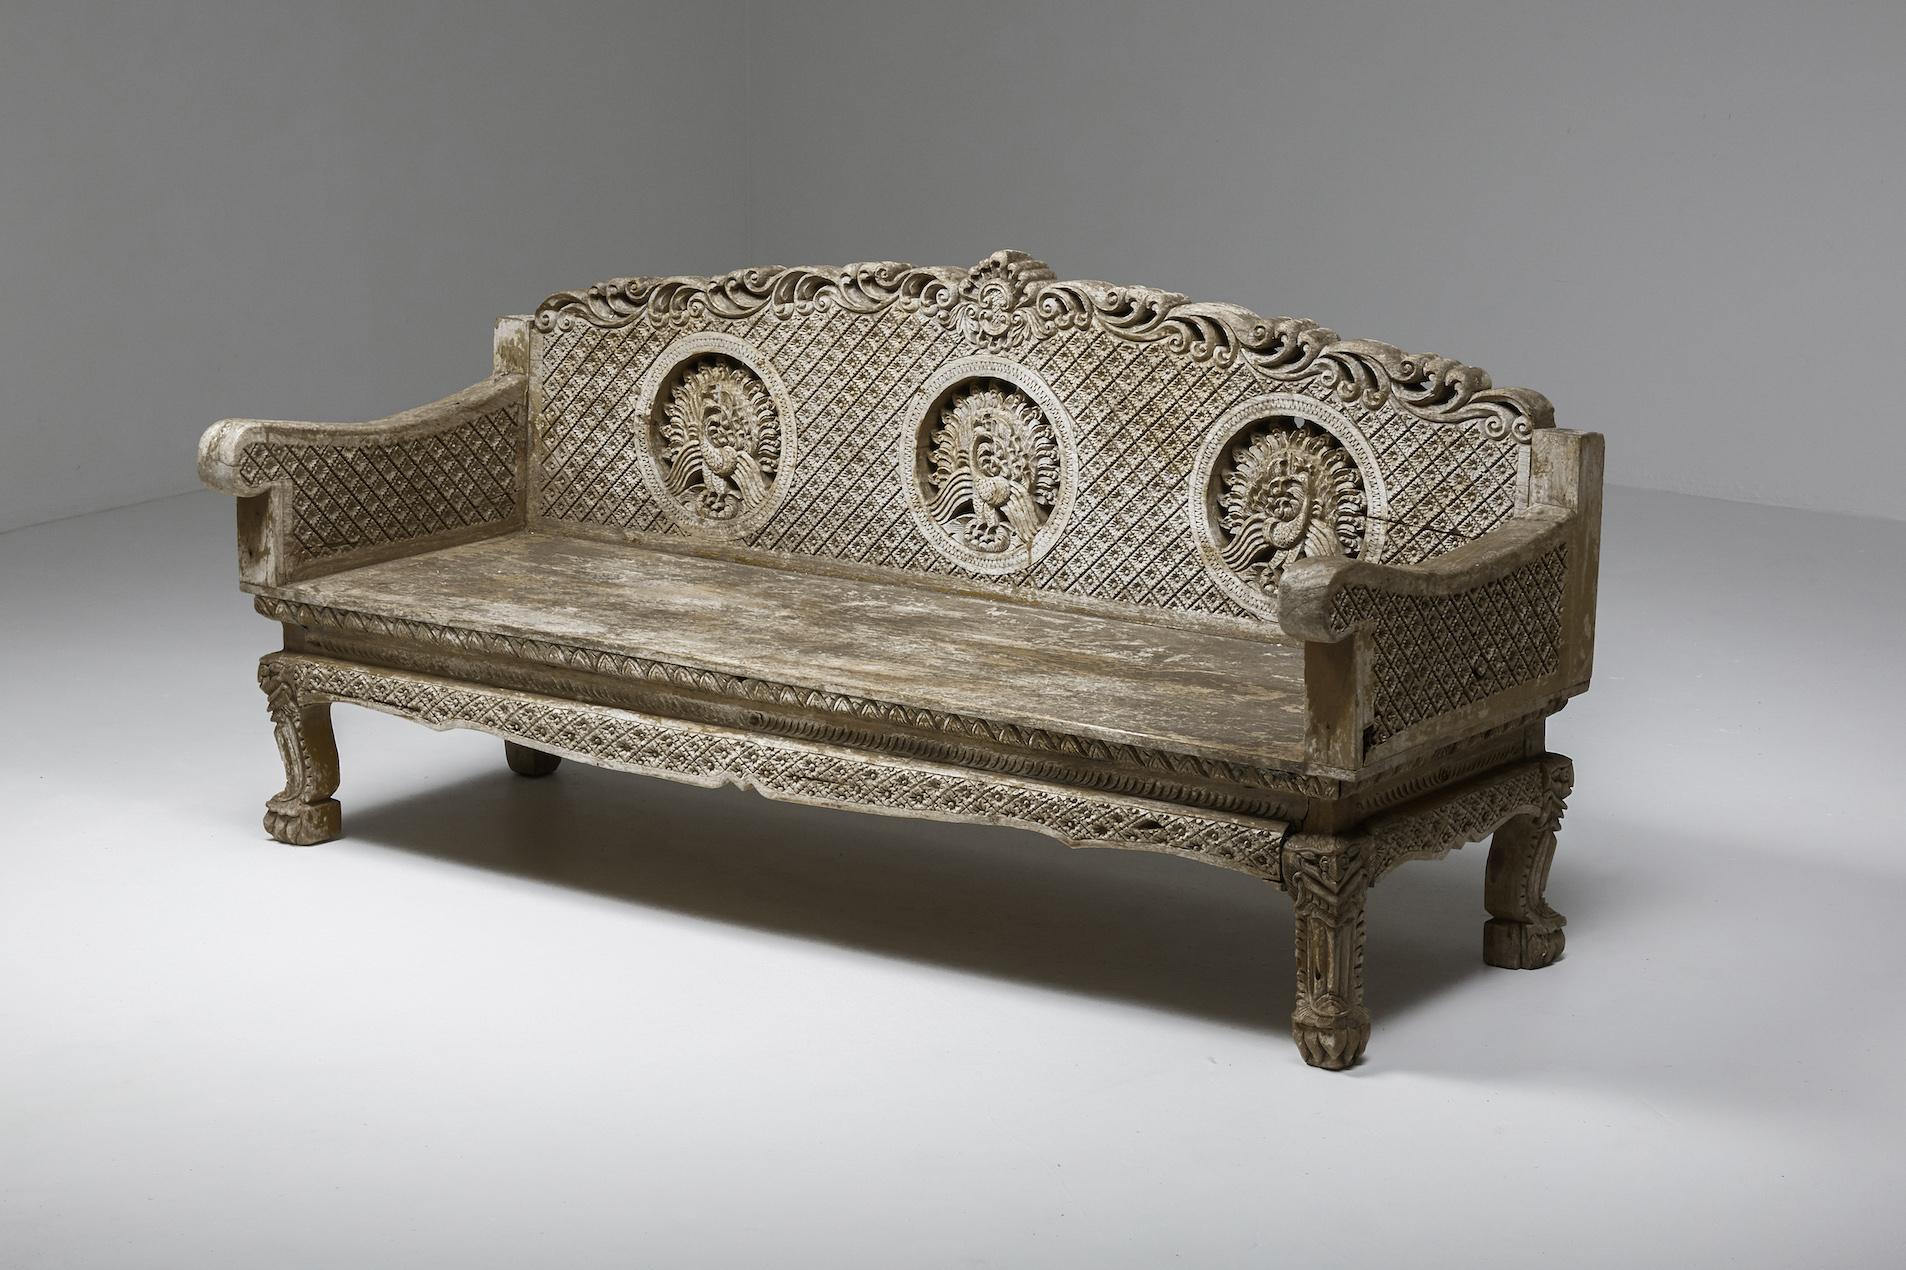 Hand Carved Wooden Bench - 1890's

Hand-carved wooden bench from France, 1890's. A true conversation piece with a unique material quality to it. The bench appears to be in stone from afar but when you touch it you are pleasantly surprised to